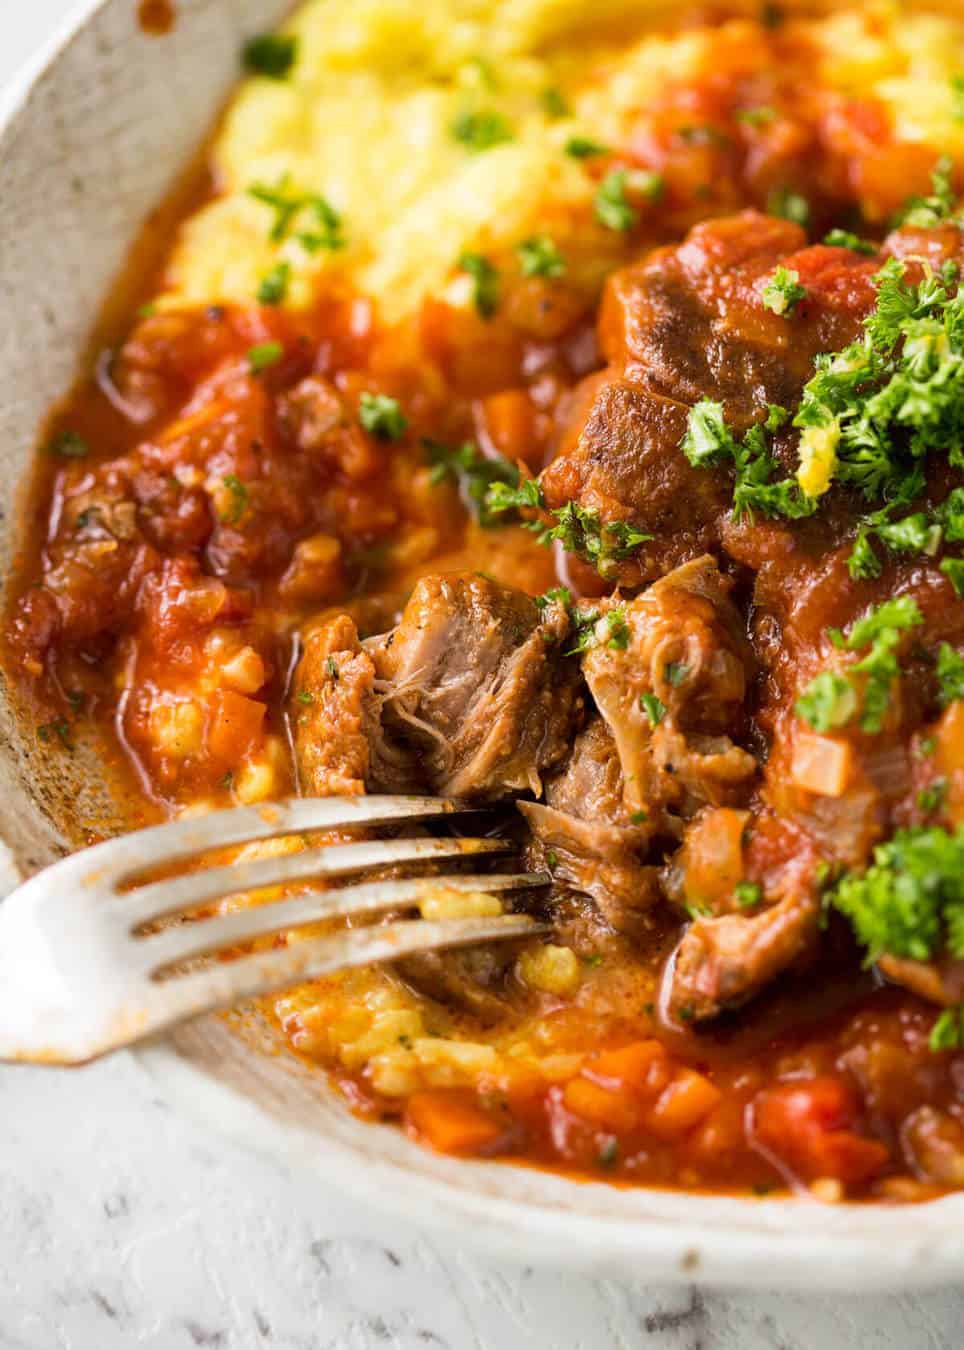 Fork tender veal braised in a rich red sauce, Osso Buco is a meal fit for a king! www.recipetineats.com